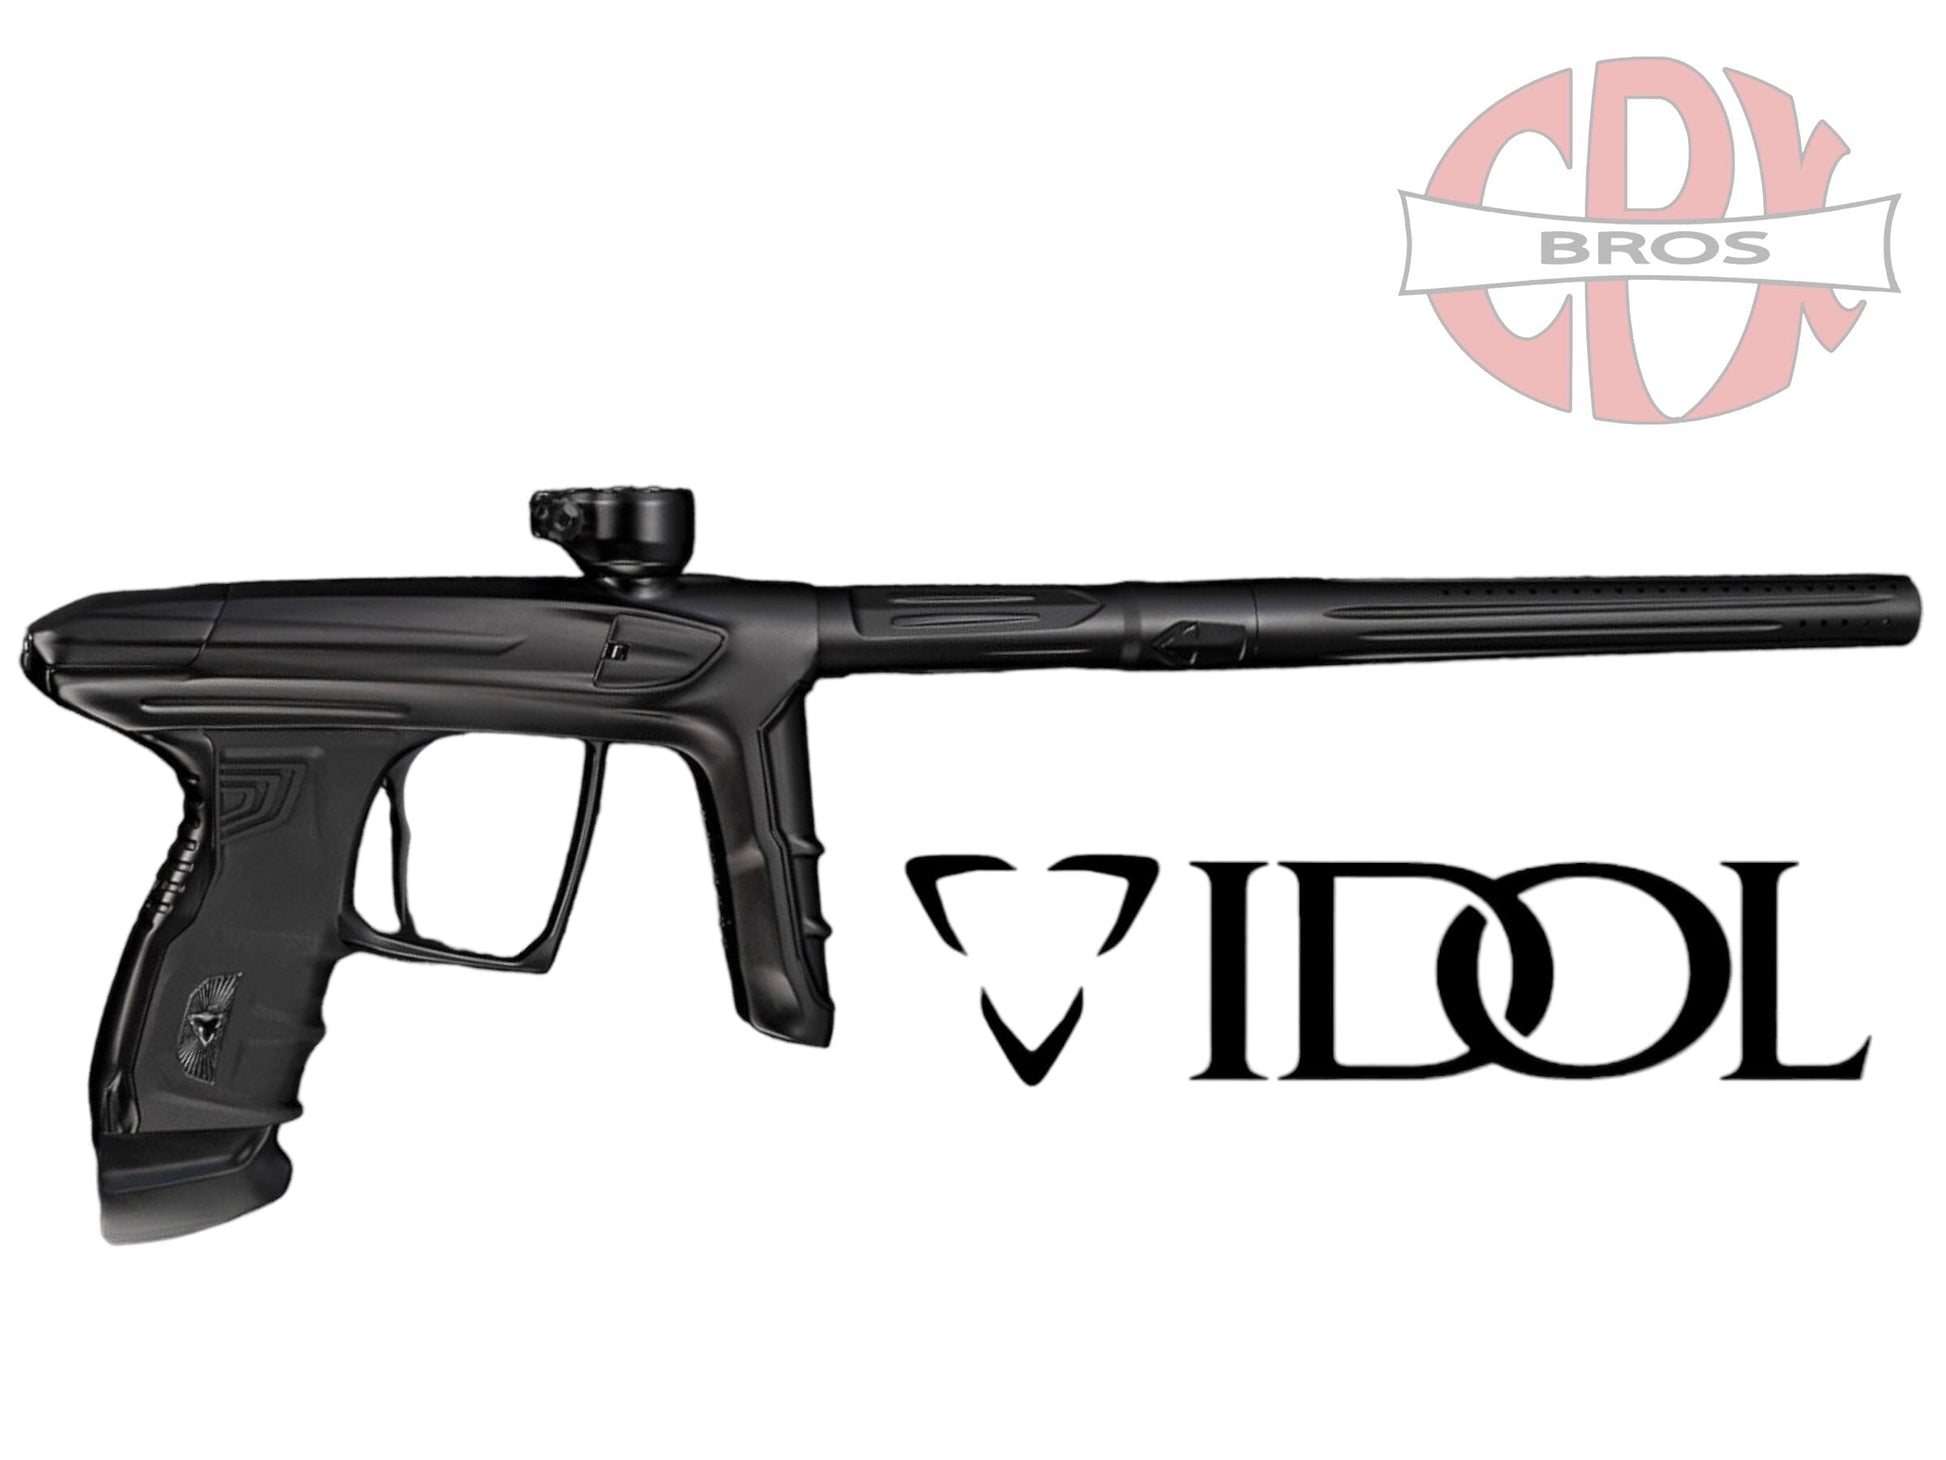 Used DLX Luxe IDOL Dust Black / Dust Black (Pre-Order) Of $1,799 Paintball Gun from CPXBrosPaintball Buy/Sell/Trade Paintball Markers, New Paintball Guns, Paintball Hoppers, Paintball Masks, and Hormesis Headbands